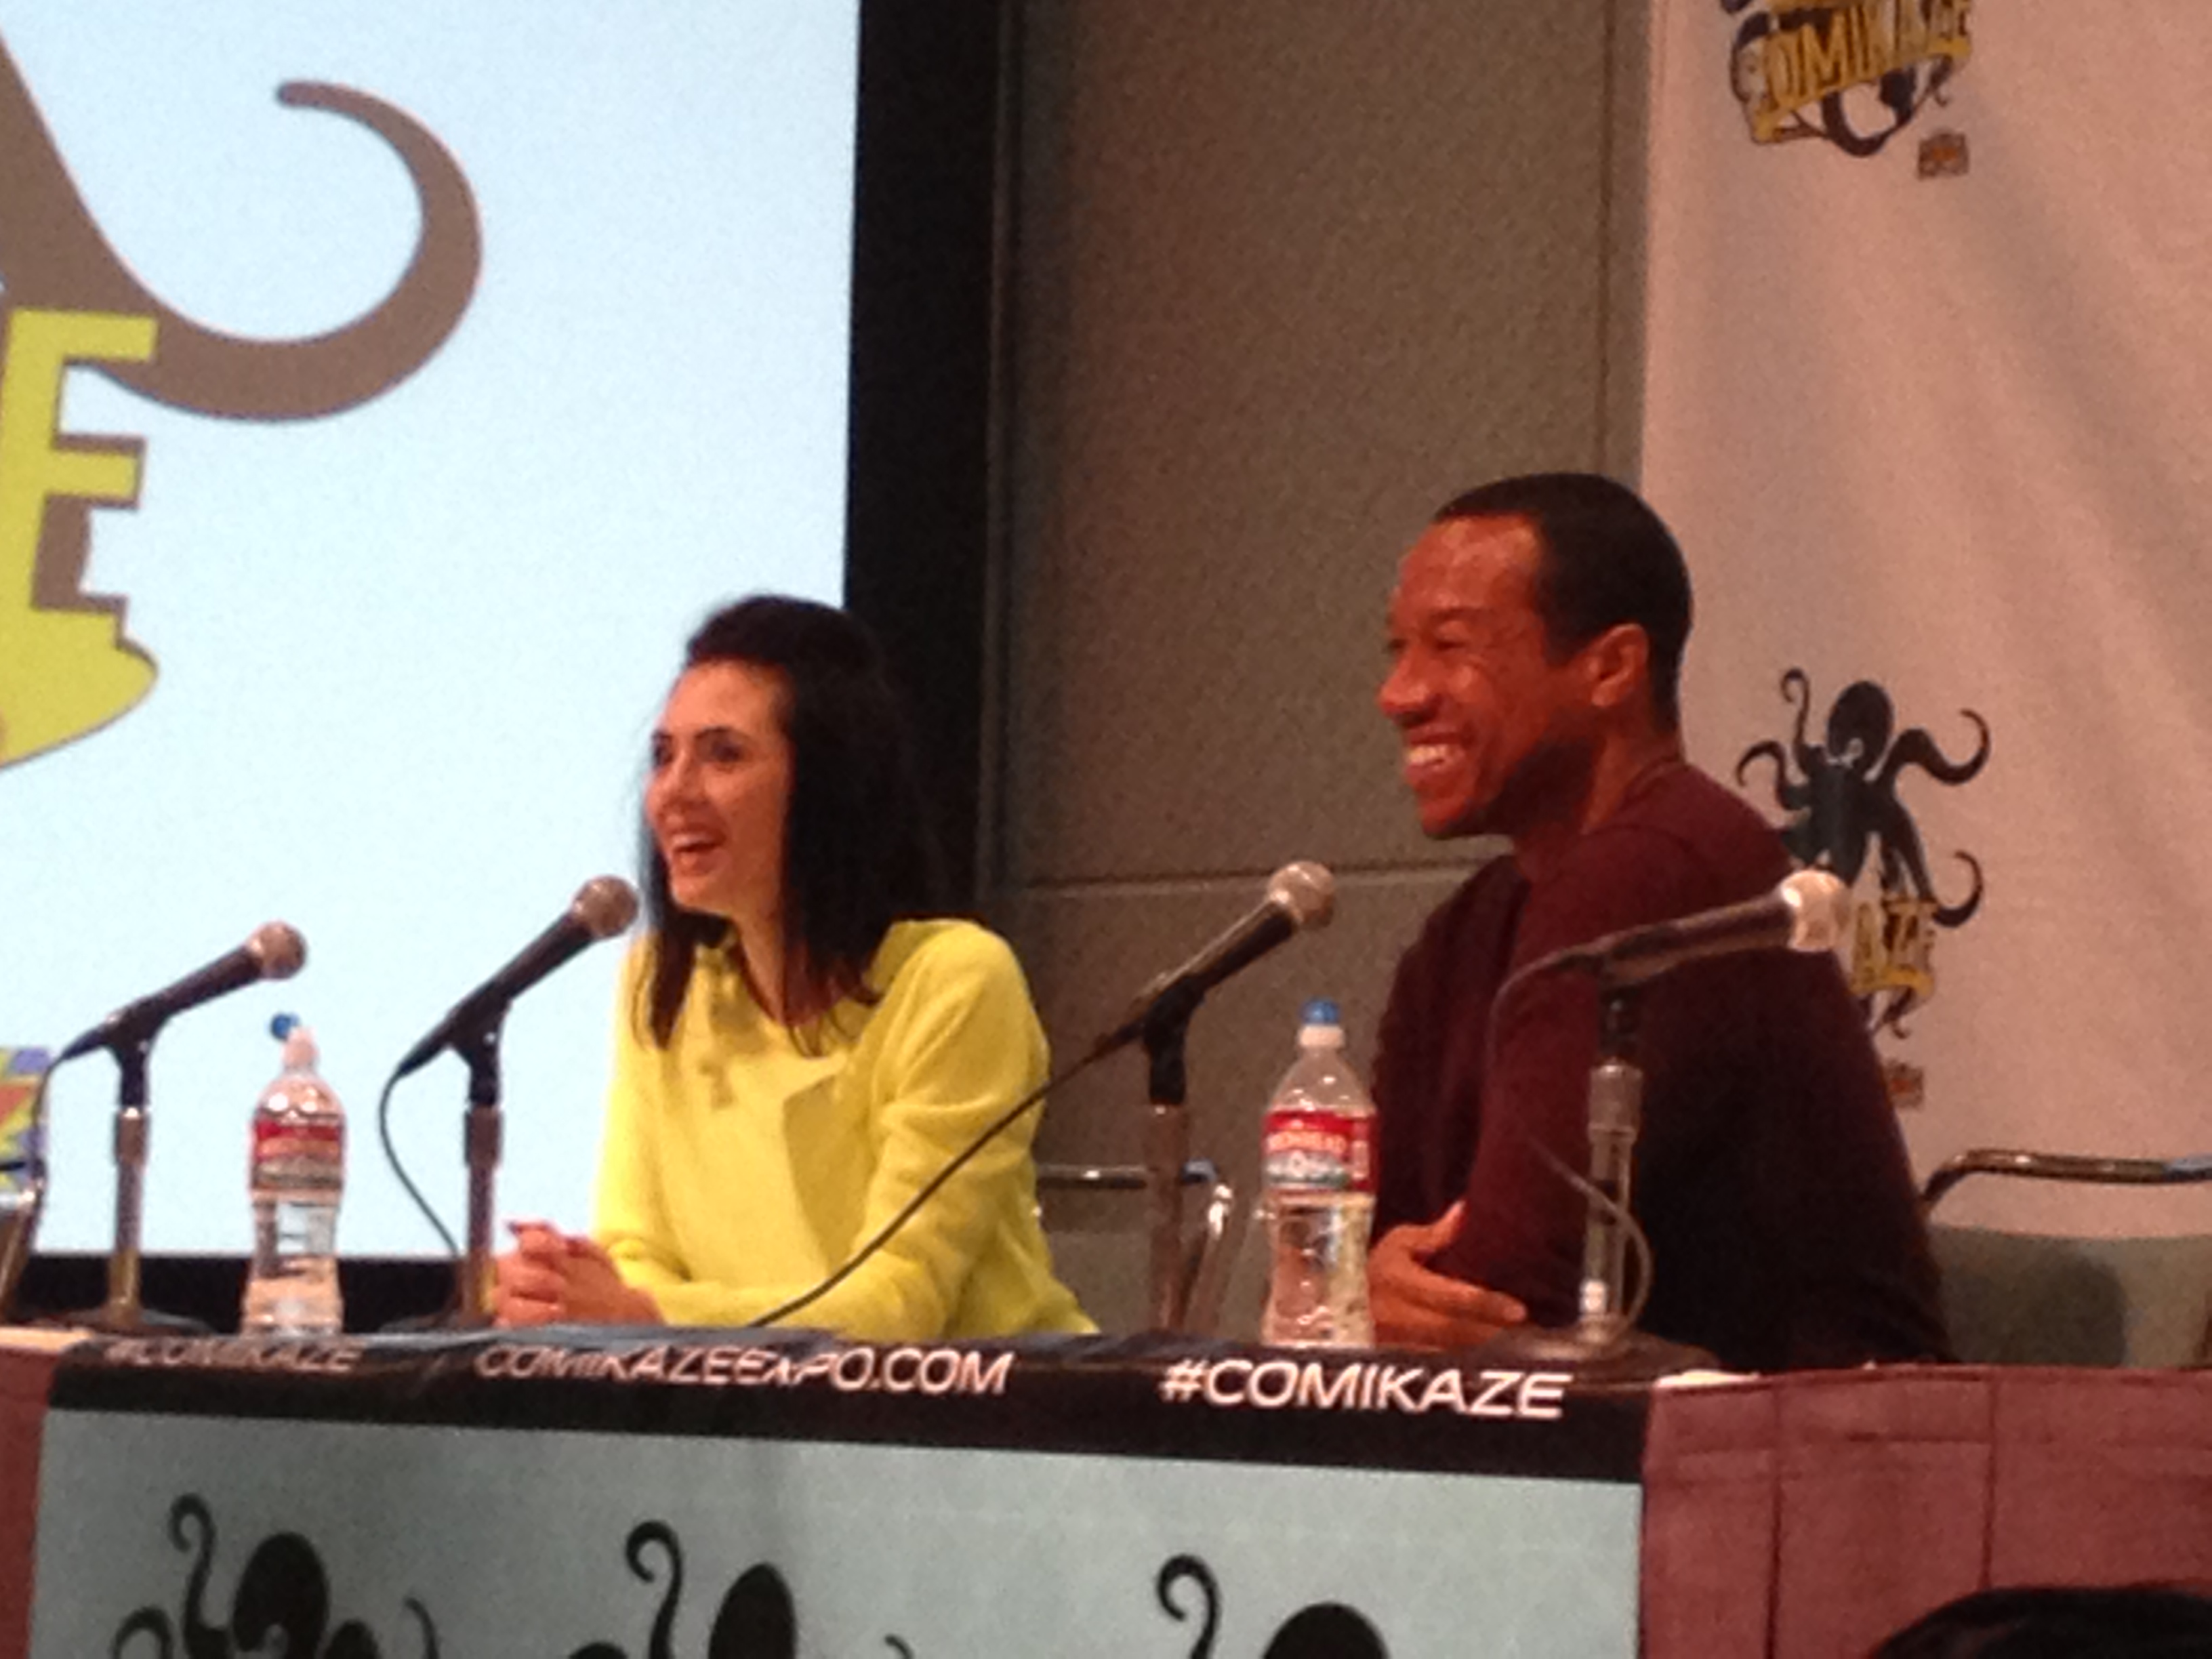 Star Trek: Renegades discussion panel with Rico E. Anderson and Adrienne Wilkinson at Stan Lee's Comikazee (2014)